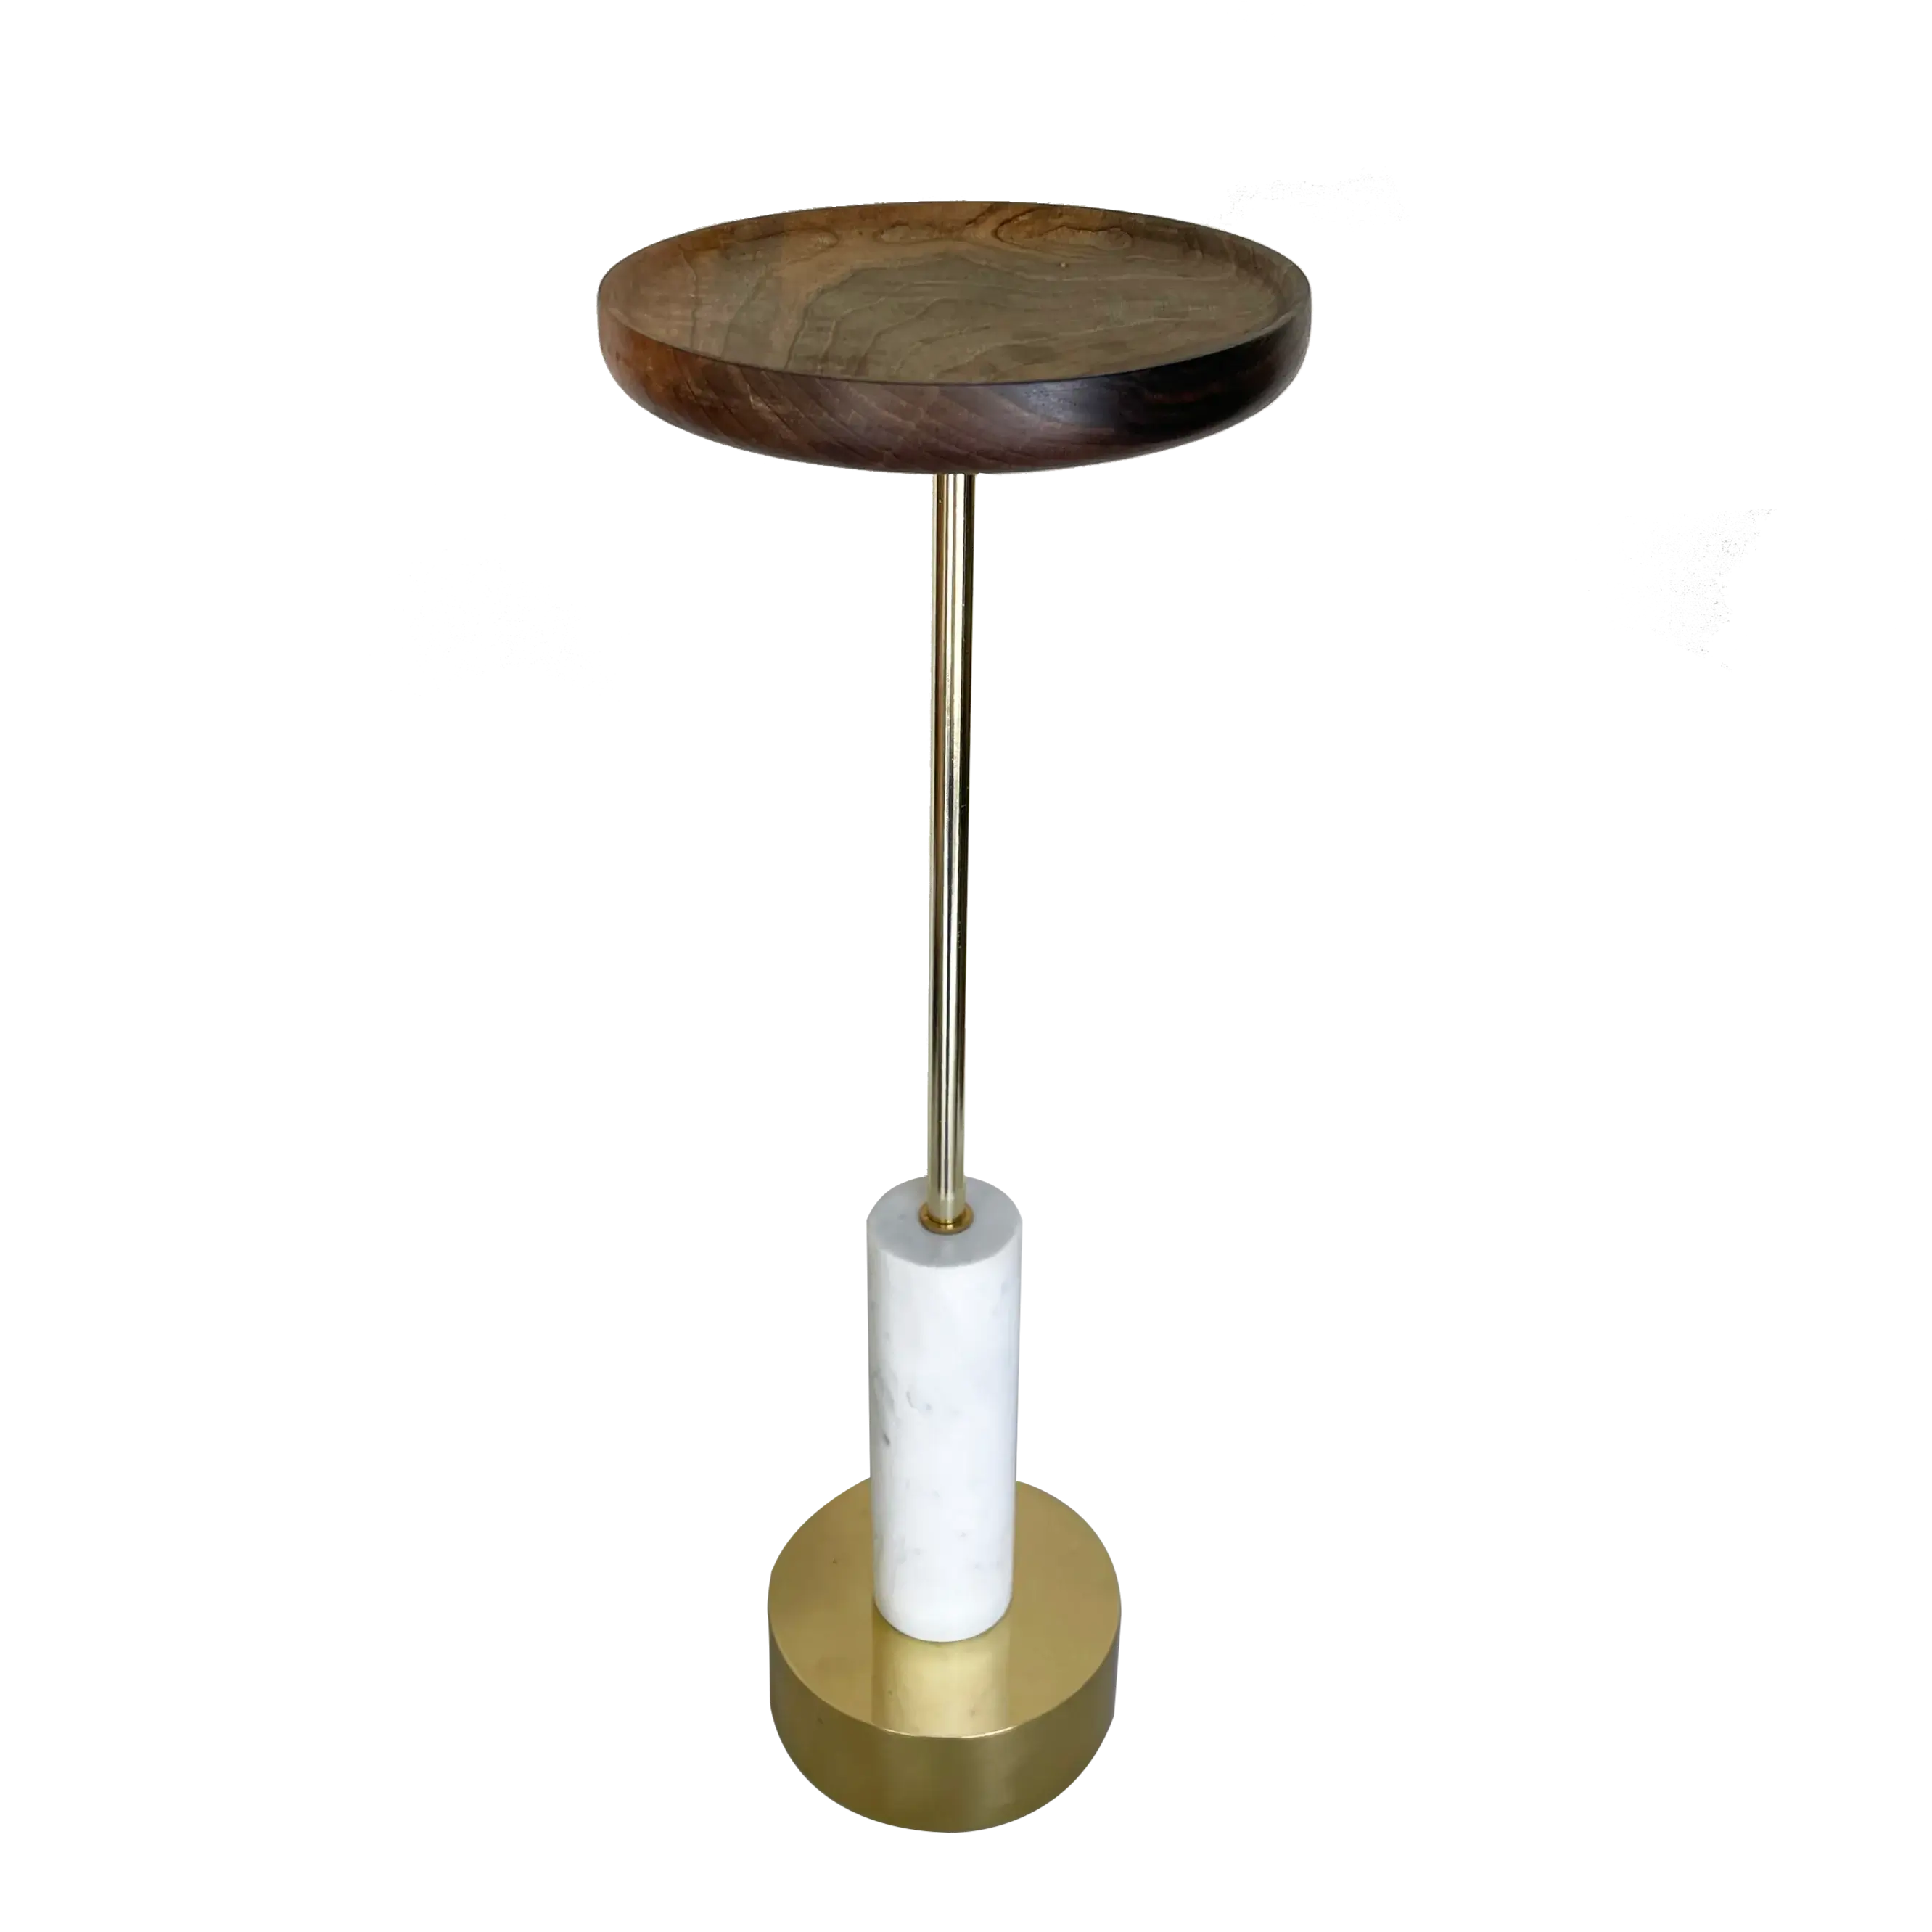 Dounia home Drink table in polished brass made of White Marble, Model: Ari